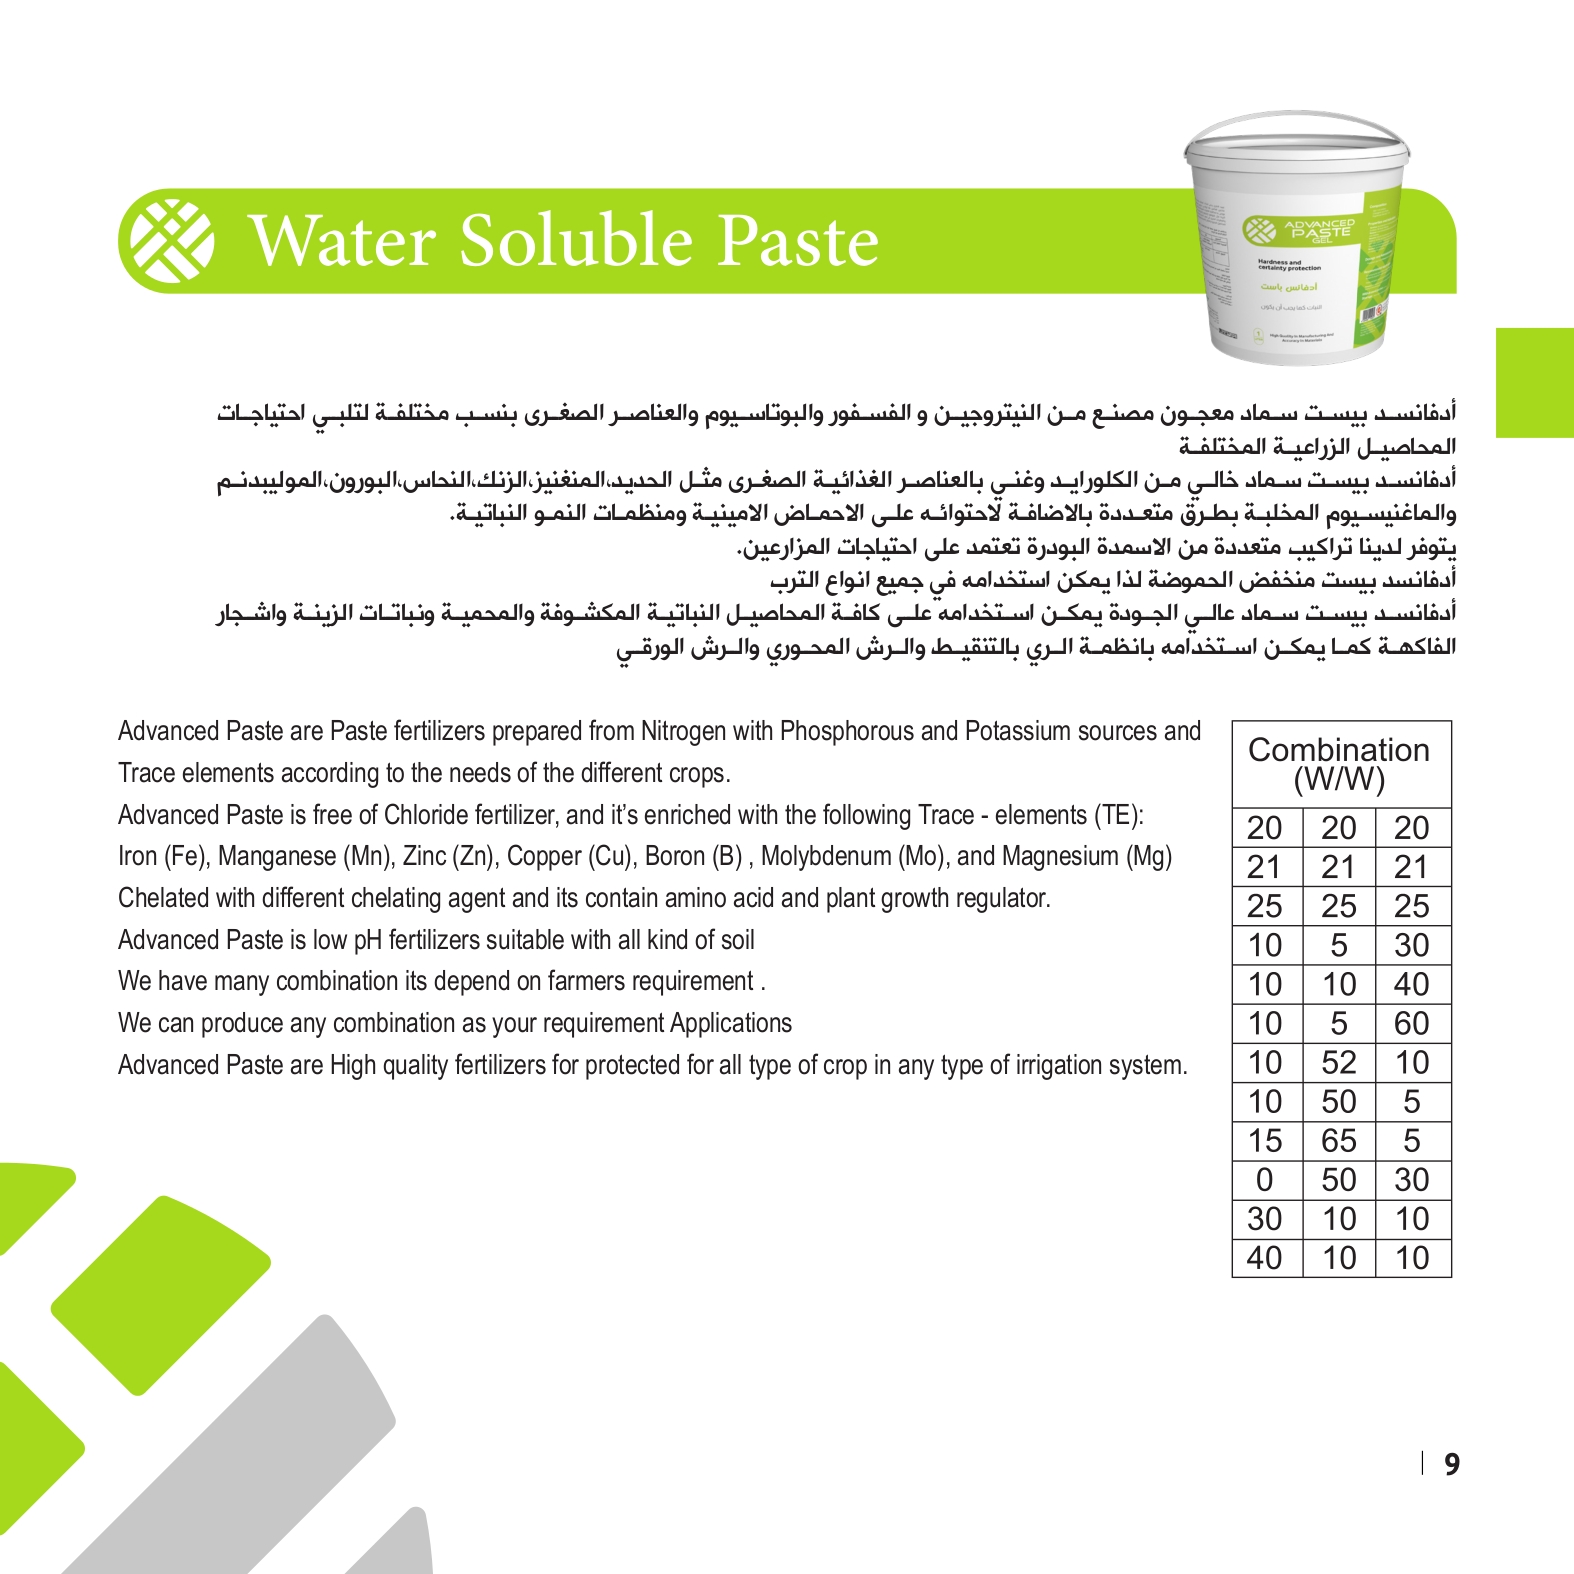 Water Soluble Paste